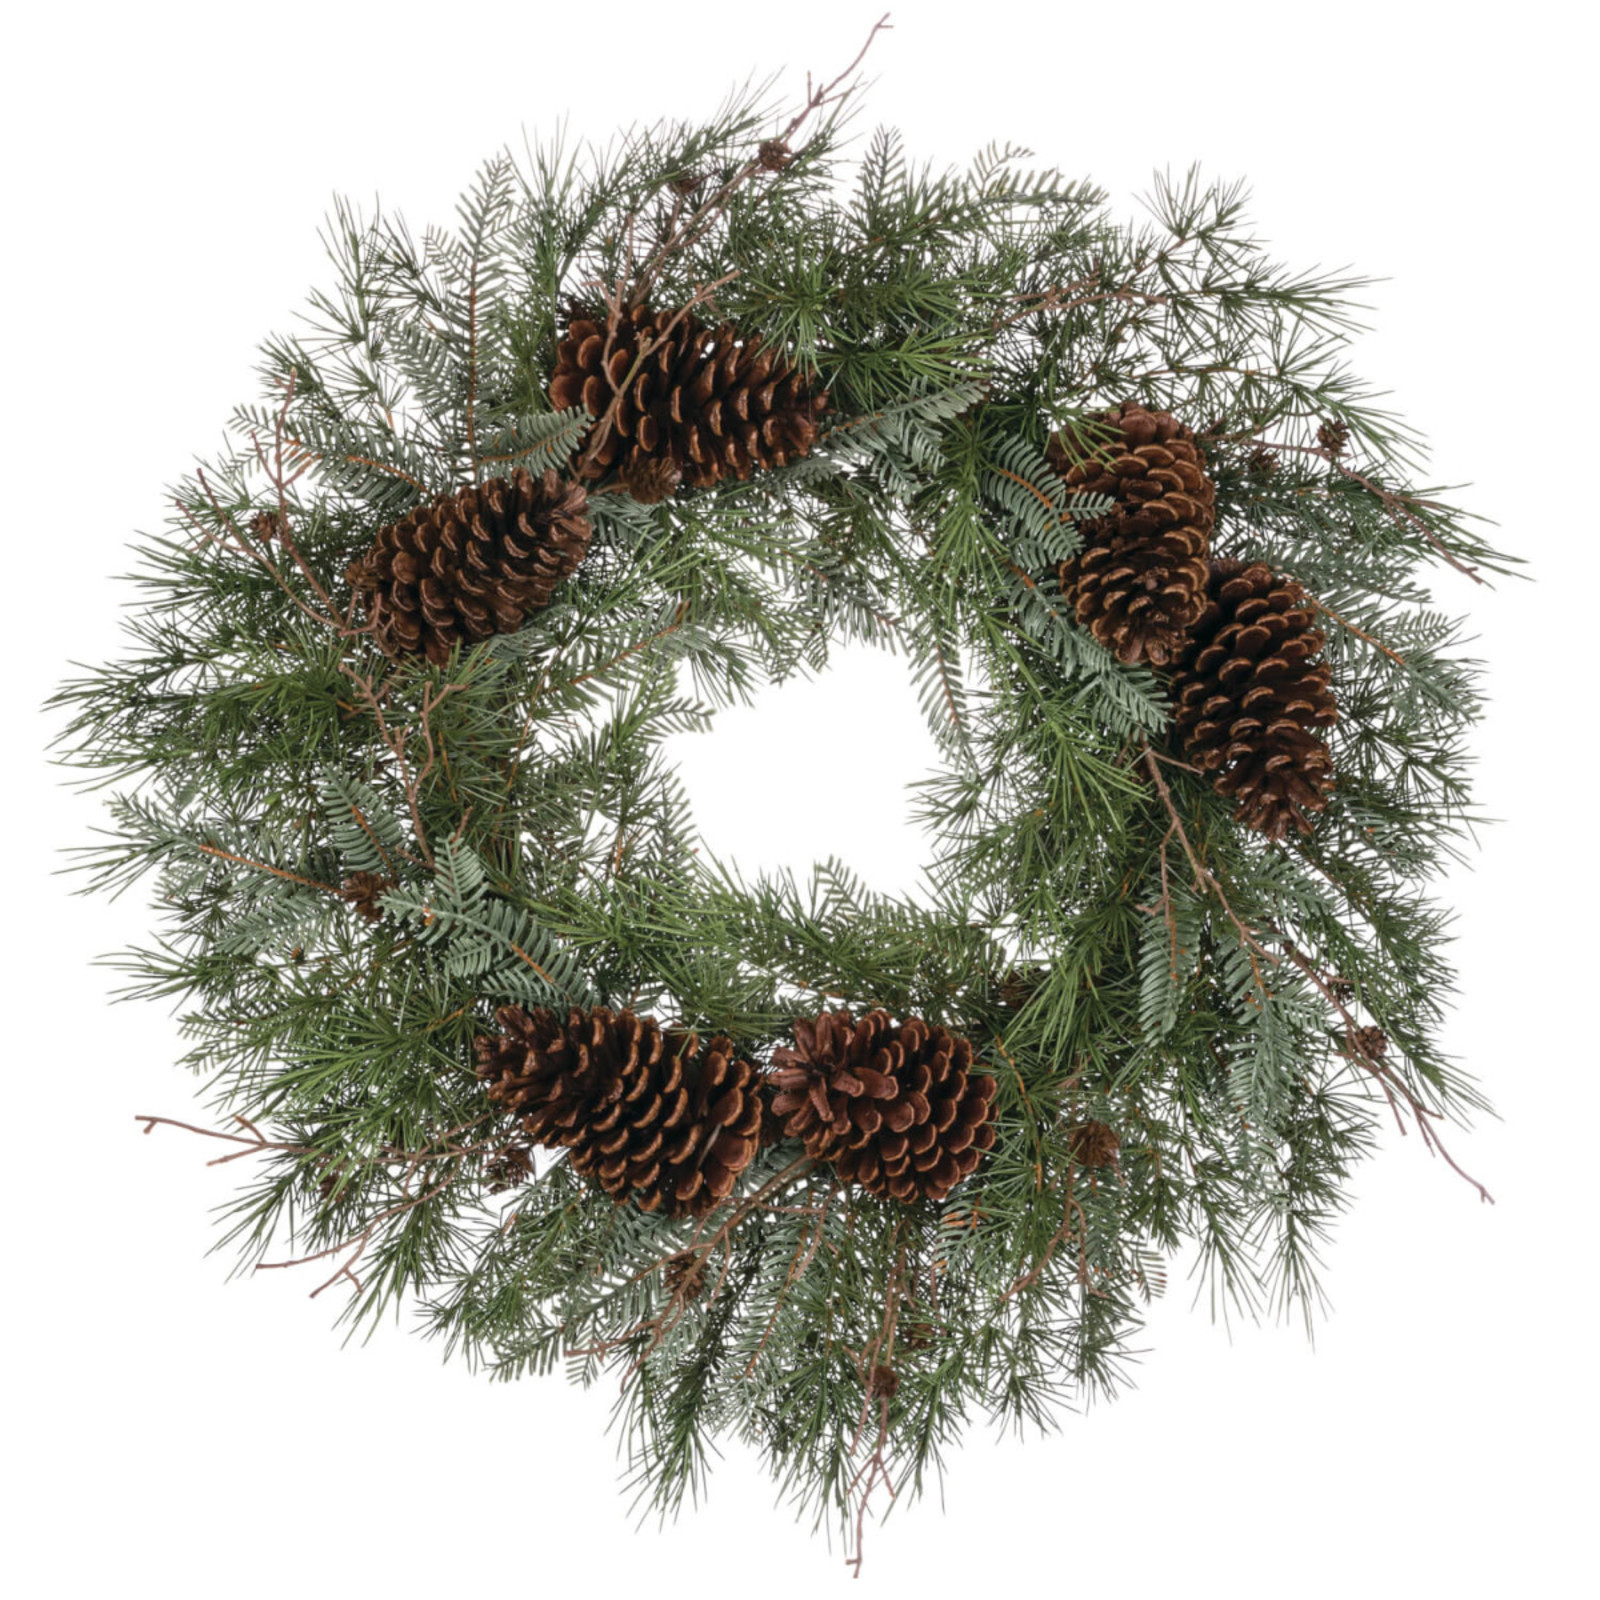 Sullivans Pine with Cones Wreath  WR817 loading=